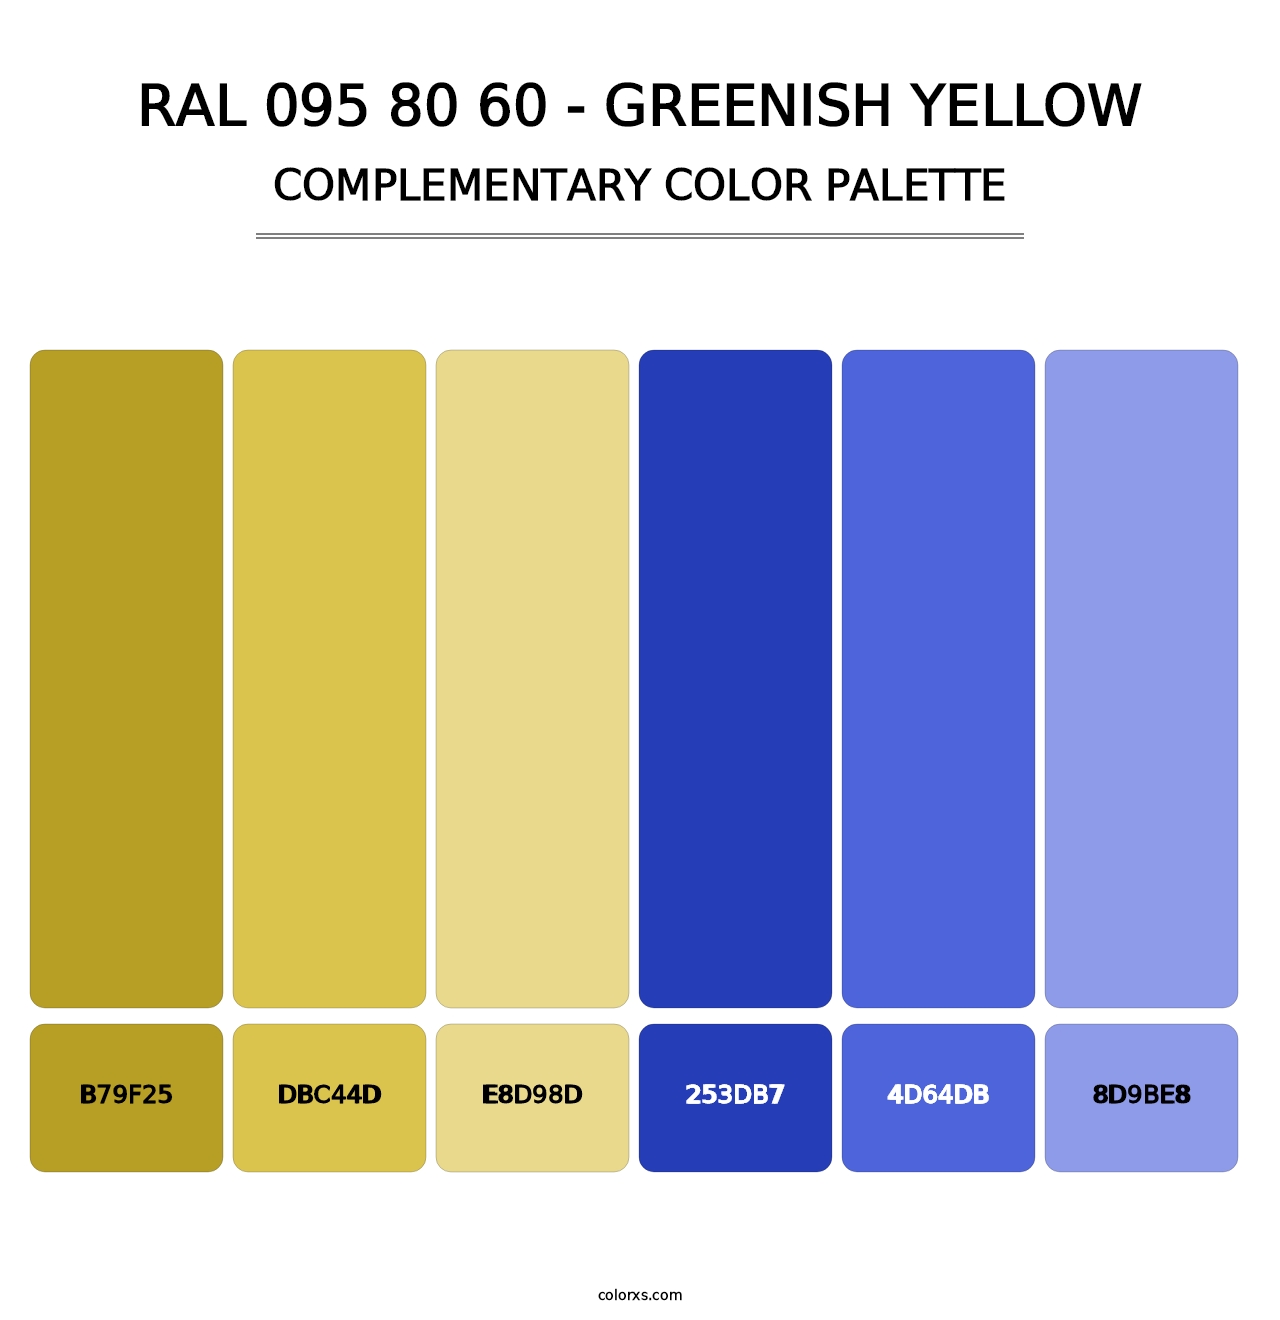 RAL 095 80 60 - Greenish Yellow - Complementary Color Palette